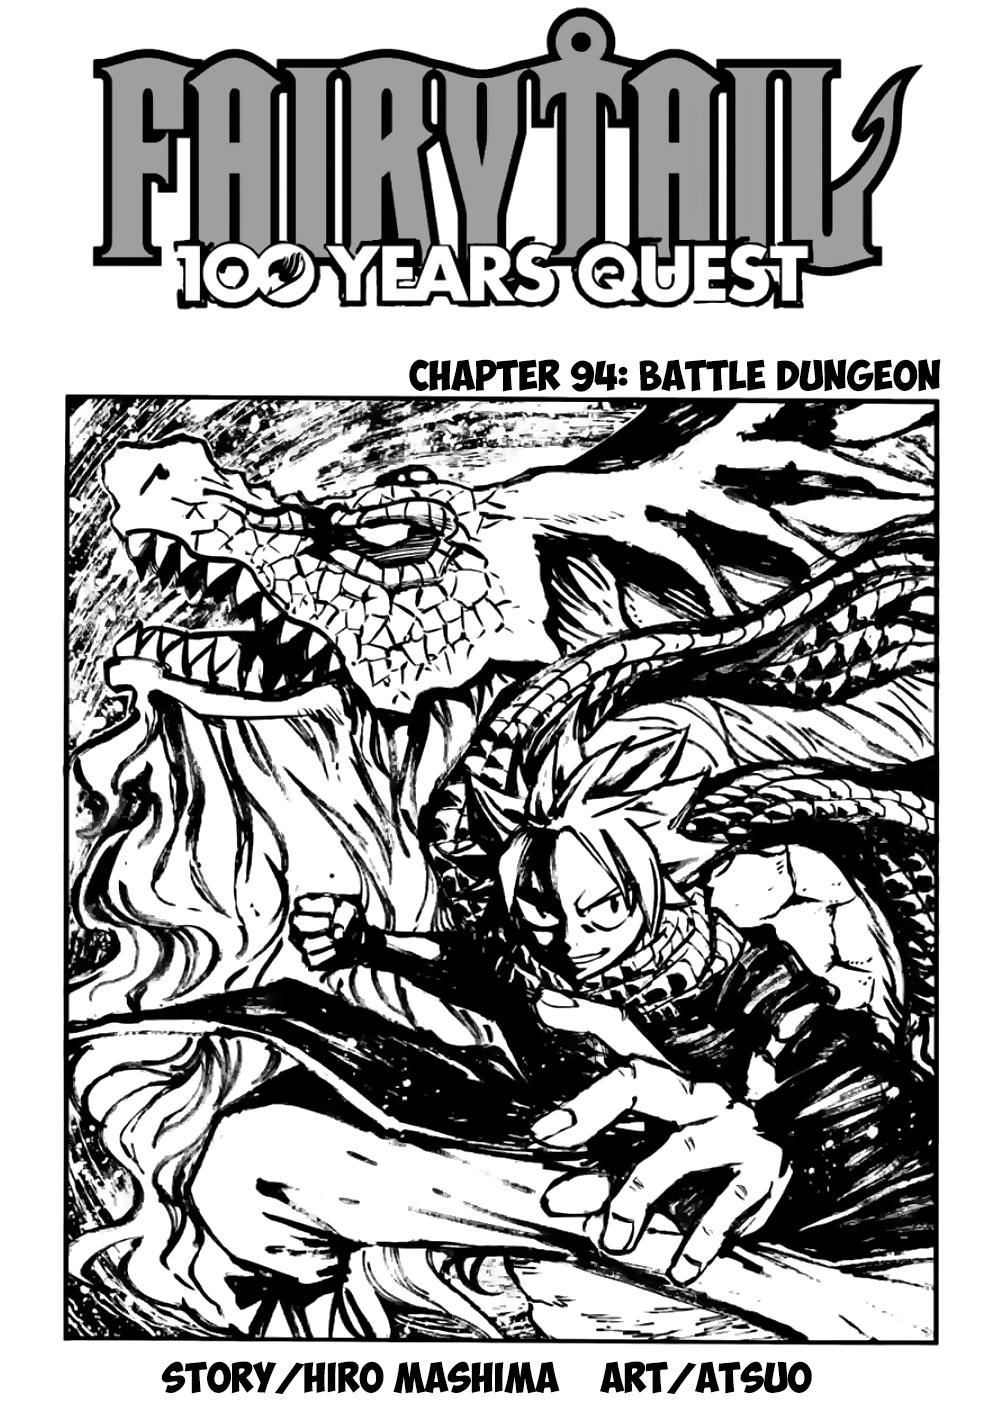 Fairy Tail 100 Years Quest Chapter 94 Read Fairy Tail 100 Years Quest Chapter 94 Online Mangadex Run